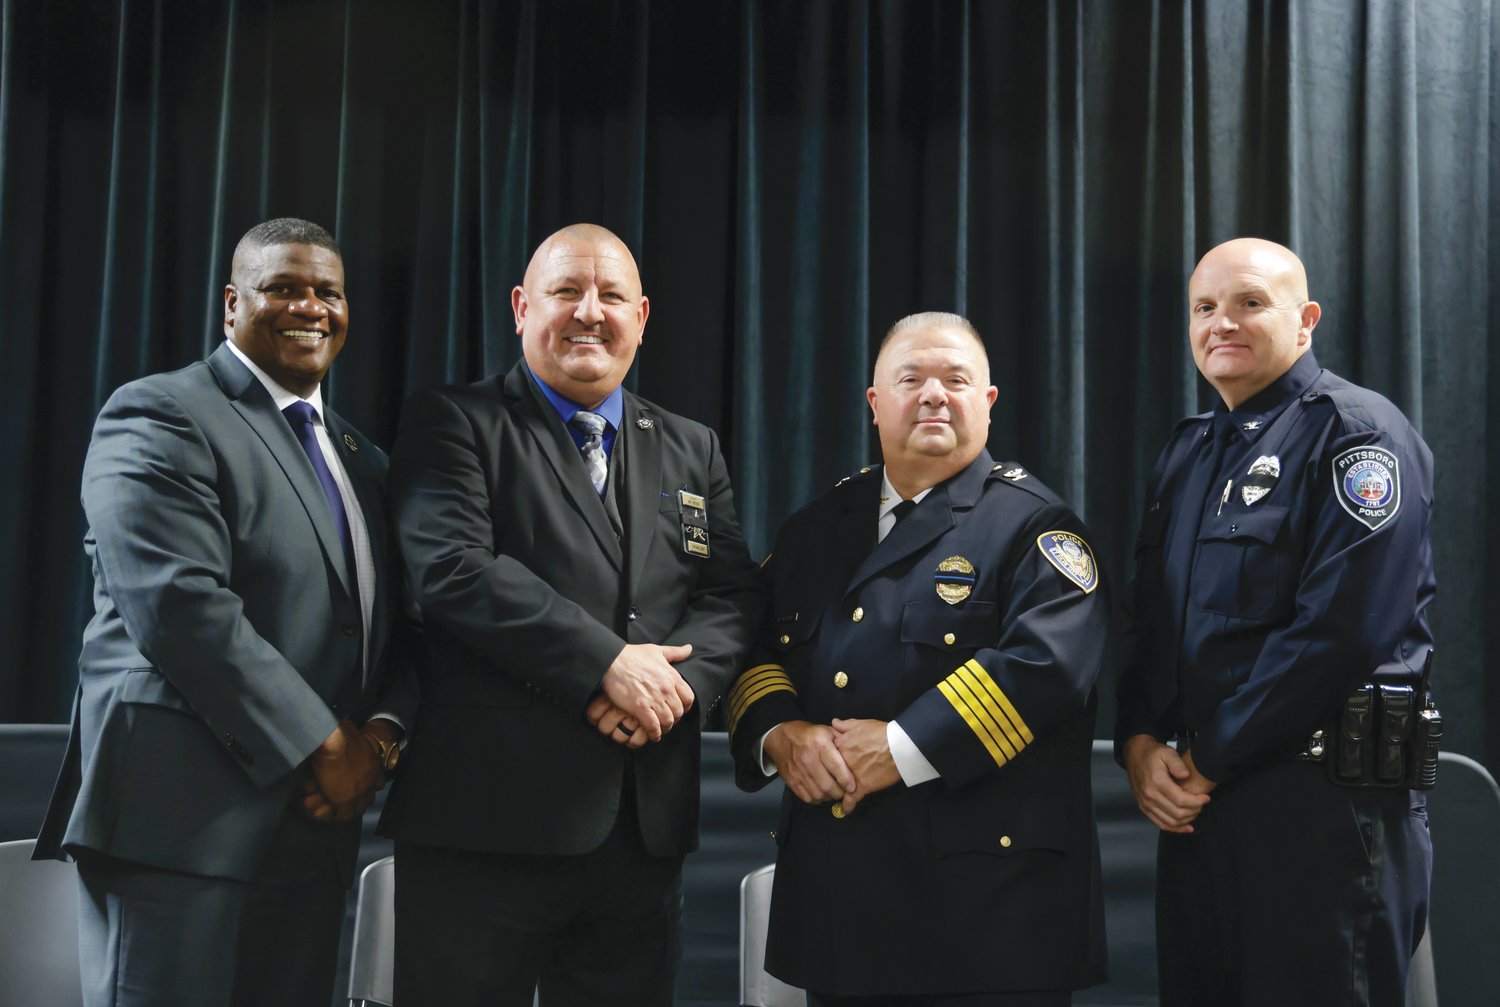 Law enforcement officers at last week's Police Week event included, from left, Edgecombe County Sheriff Cleveland Atkinson, Chatham County Sheriff Mike Roberson, Siler City Police Chief Mike Wagner and Pittsboro Police Chief Shorty Johnson.